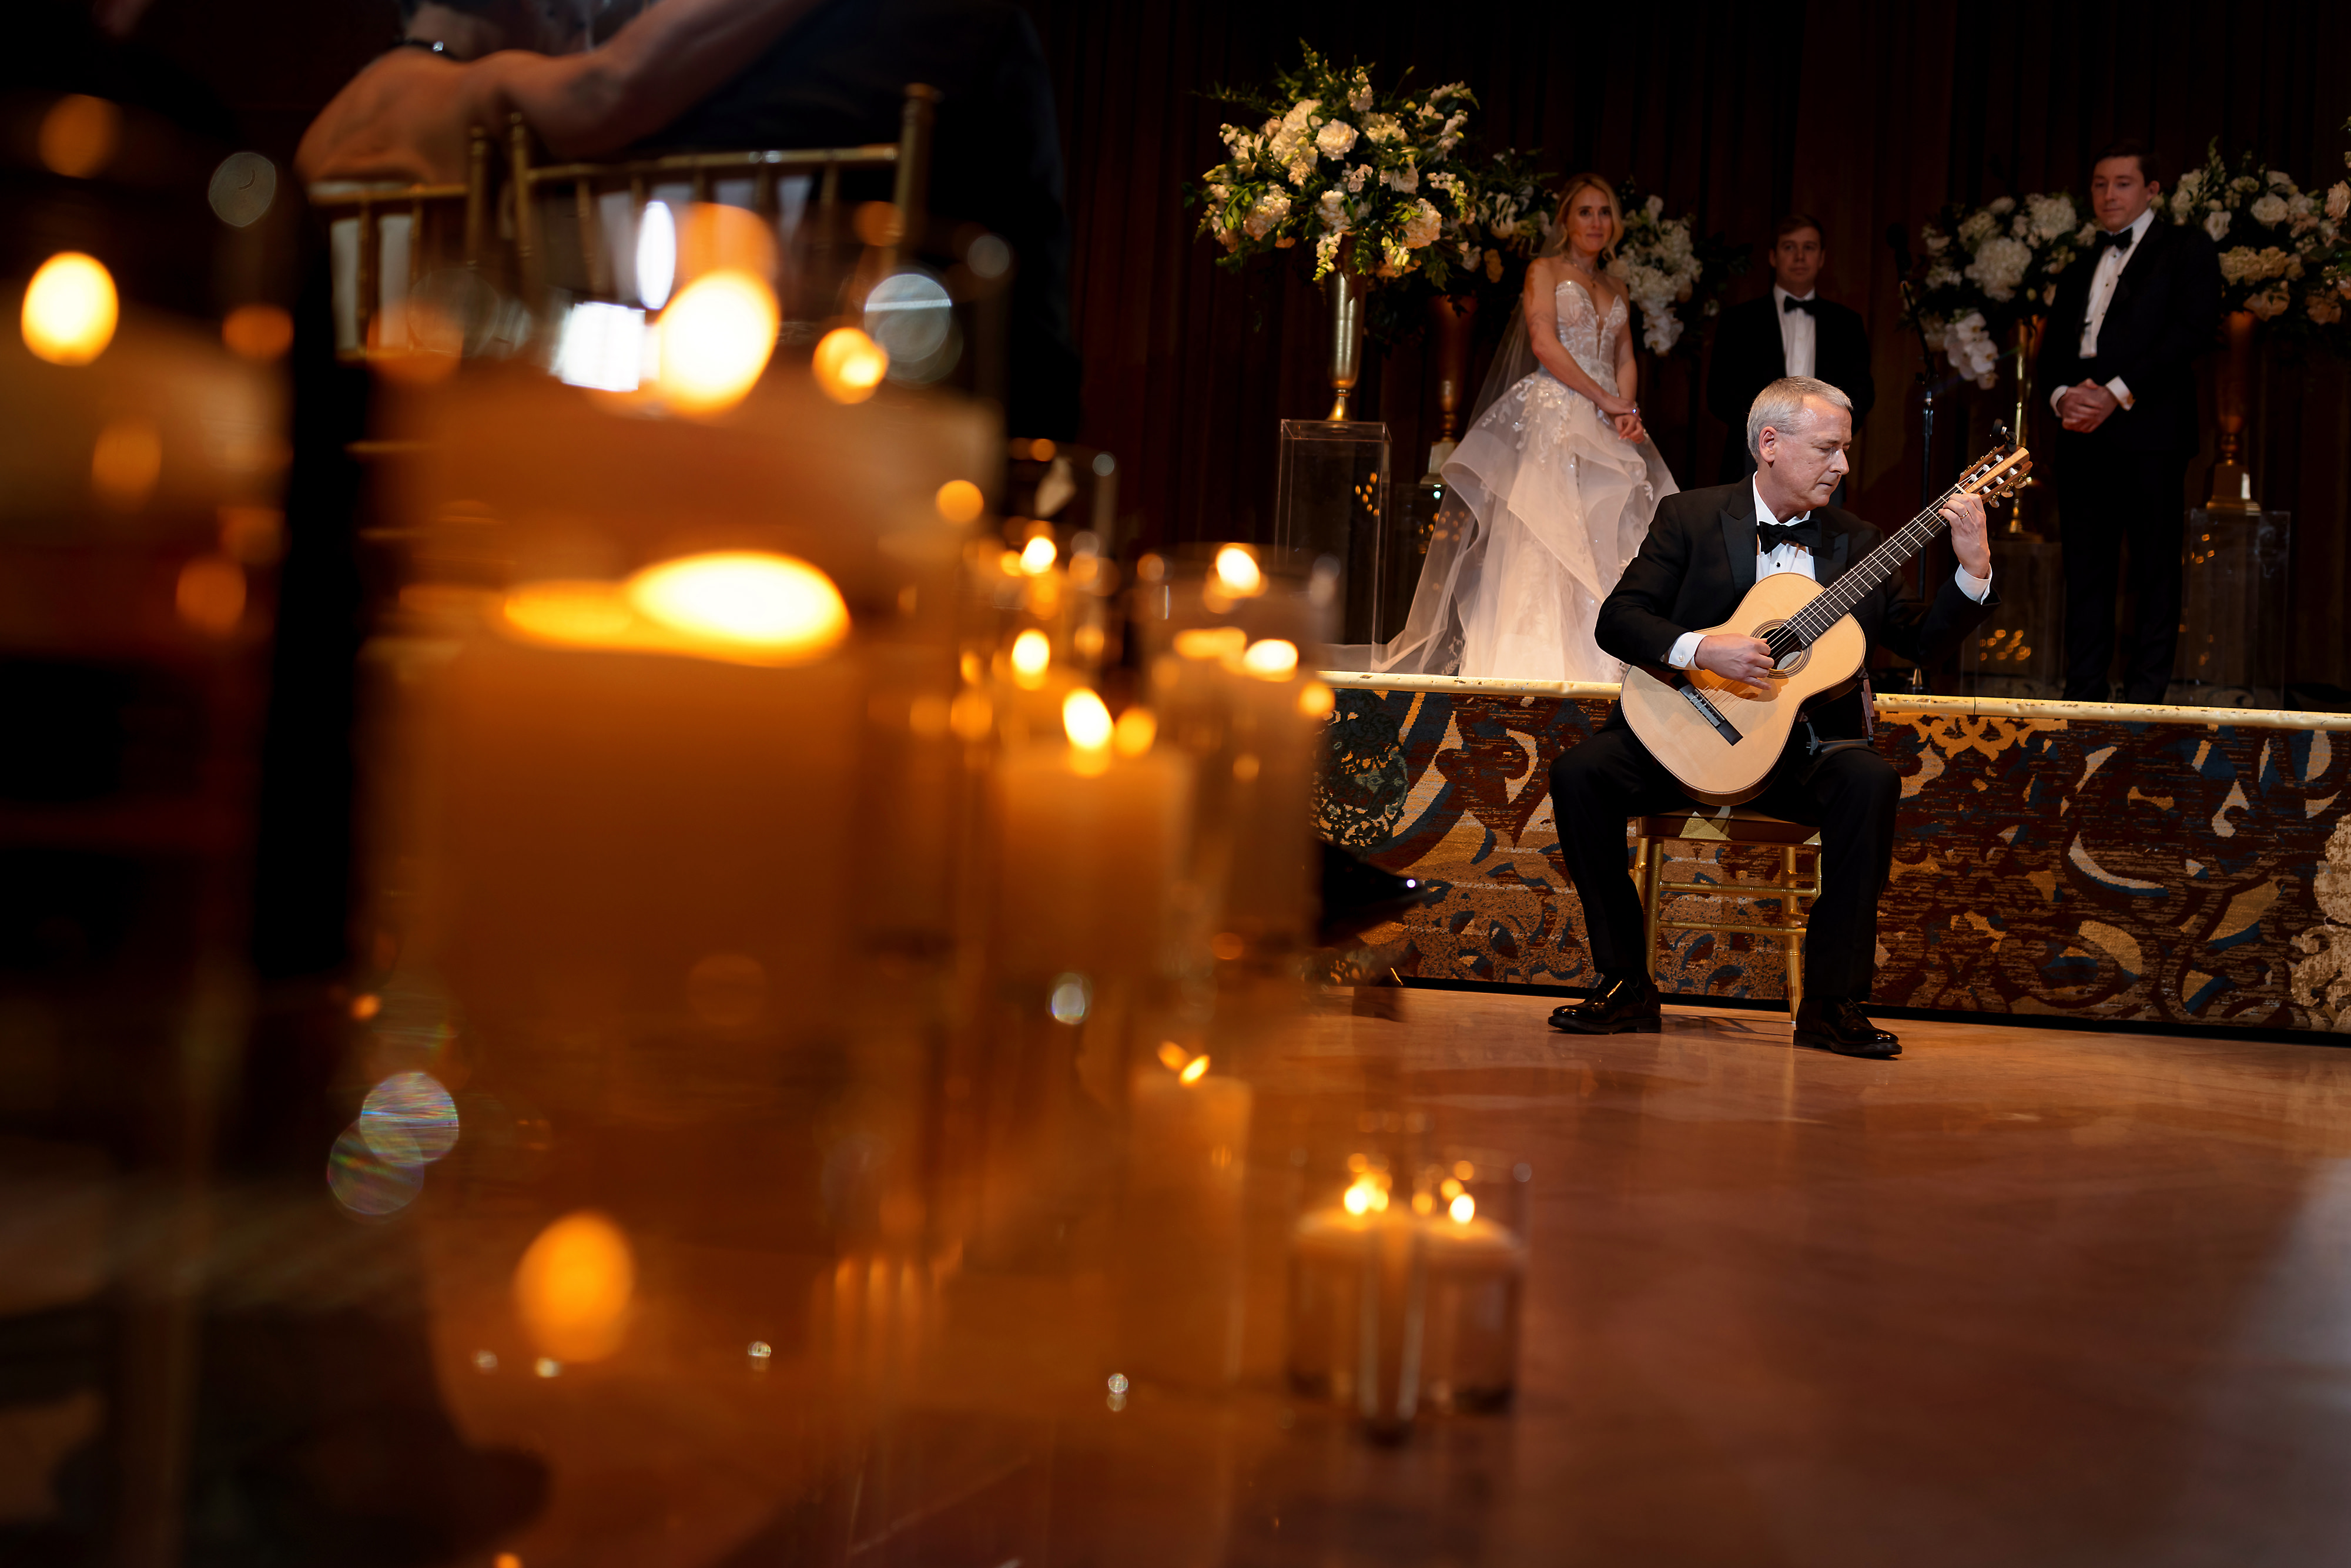 Father of the bride plays guitar during wedding ceremony in the Grand Ballroom at The Drake Hotel in Chicago